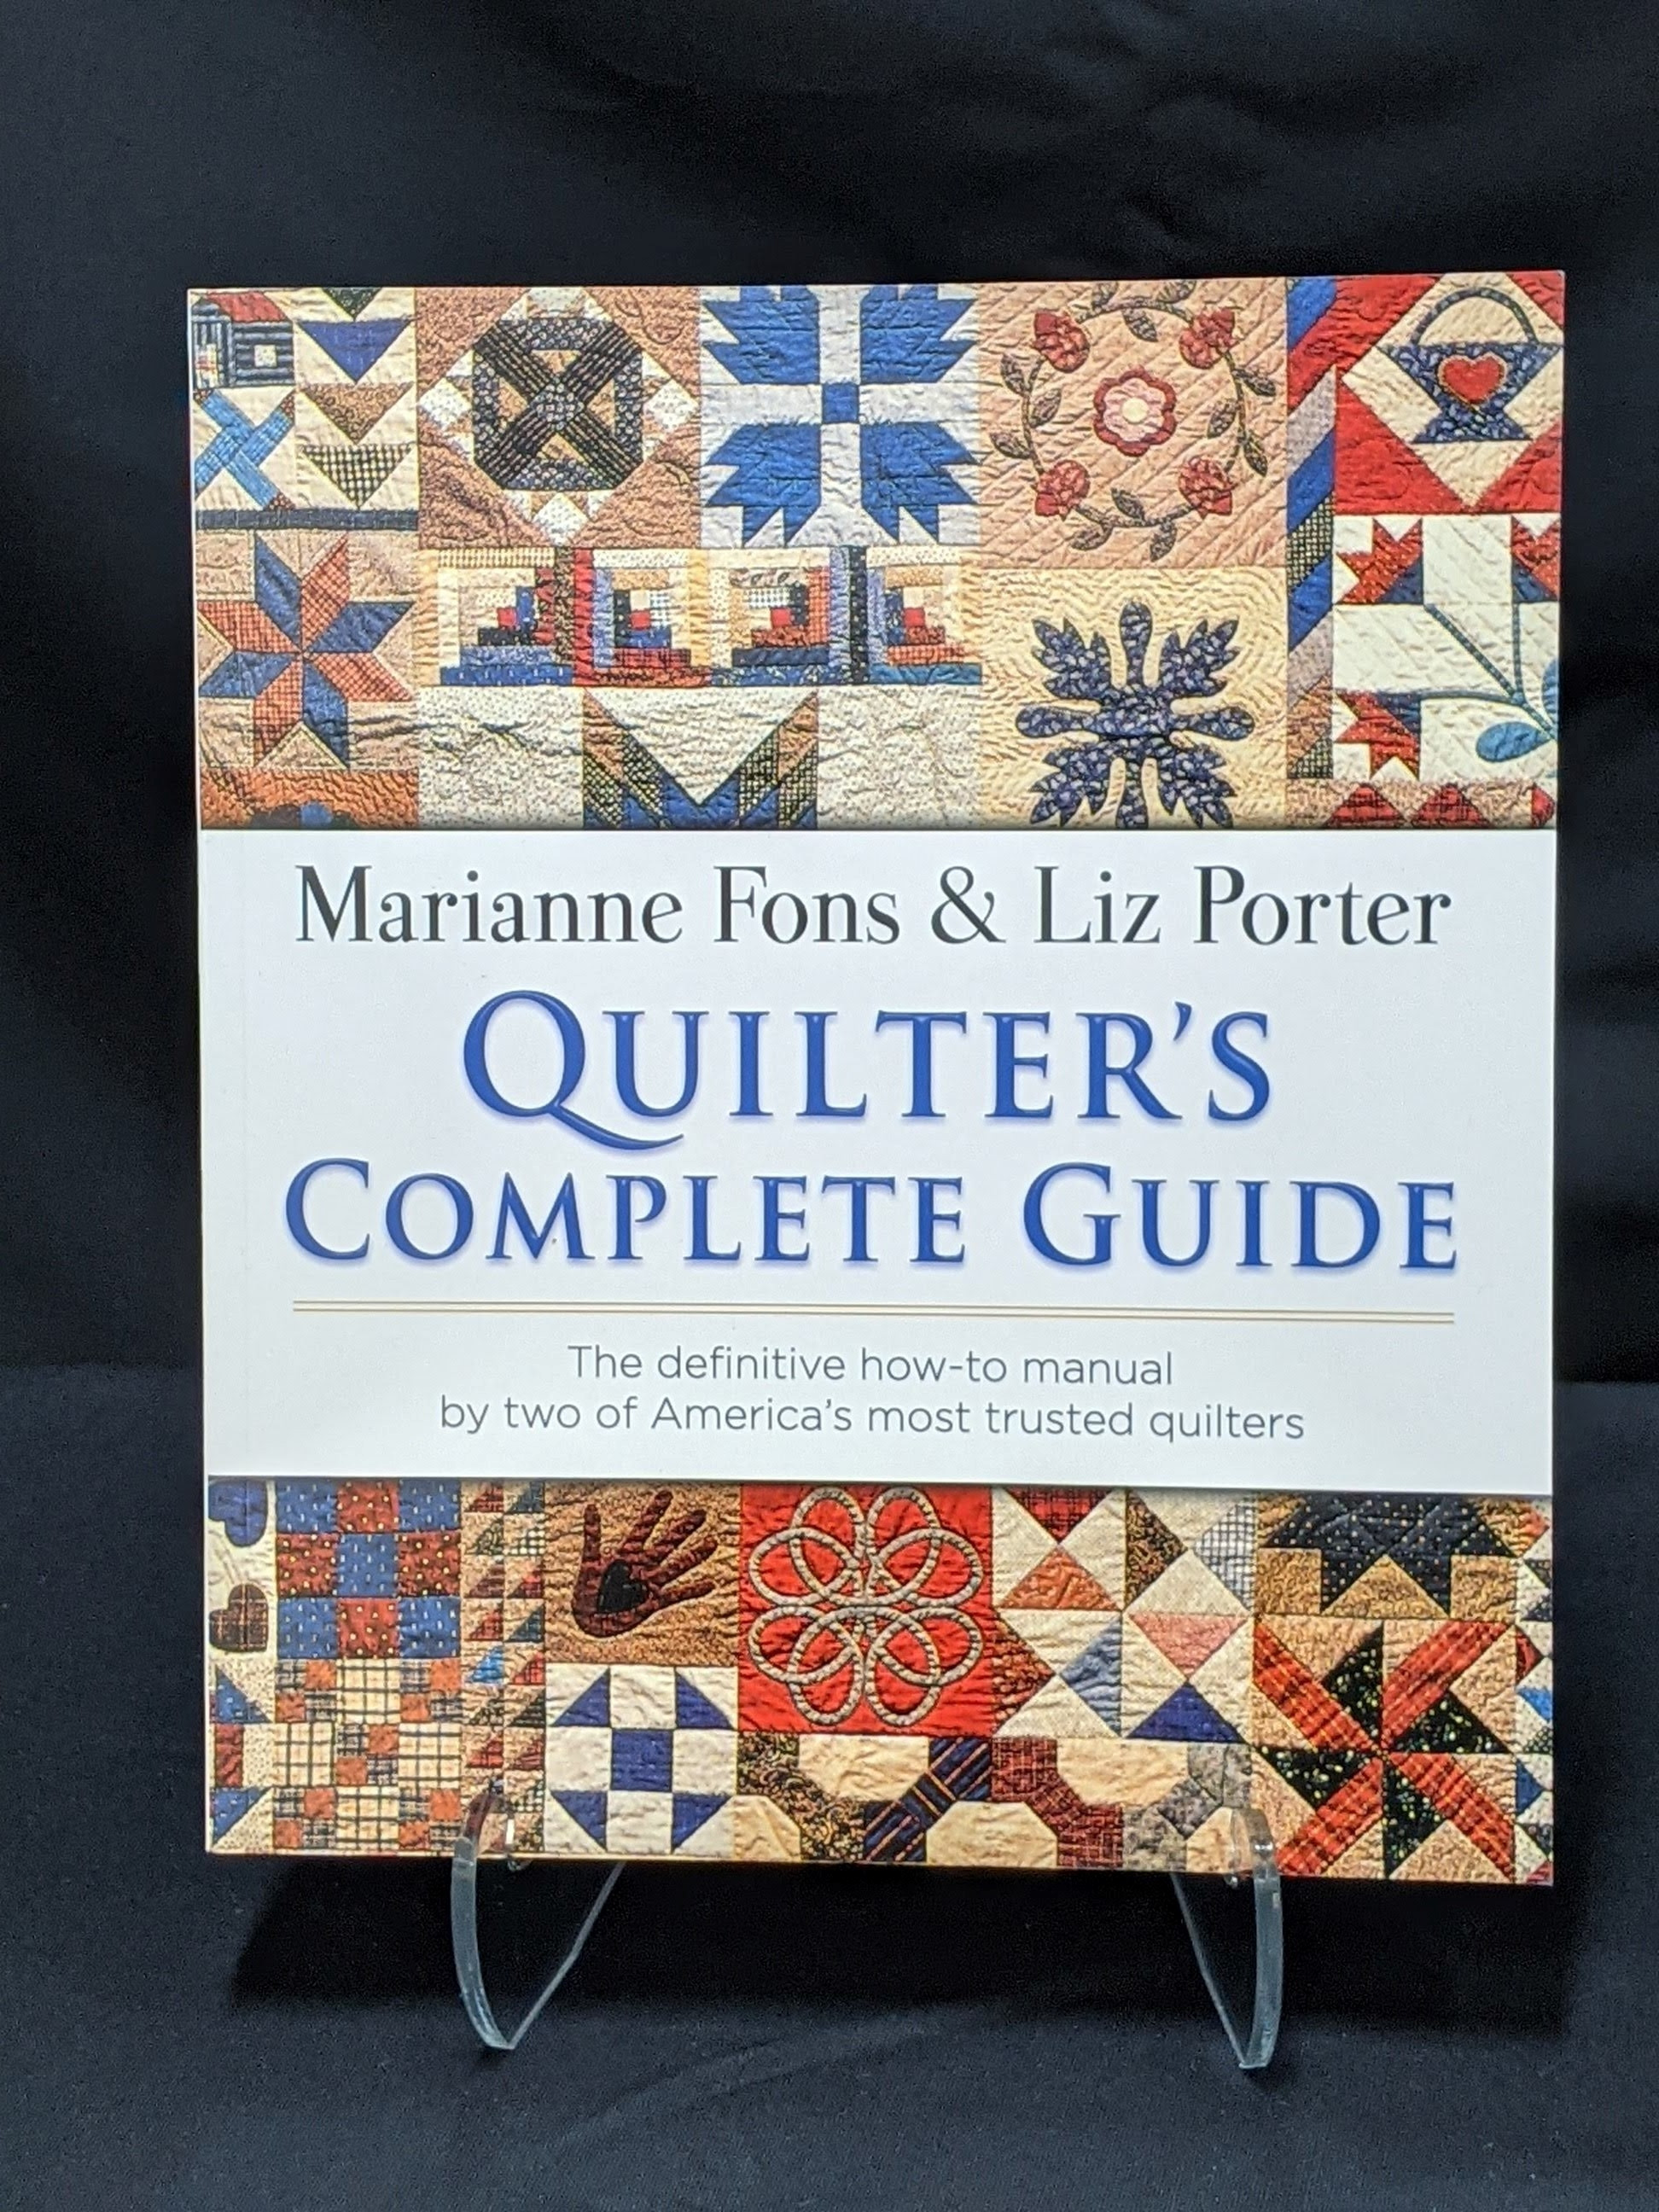 Quilter's Complete Guide by Marianne Fons & Liz Porter